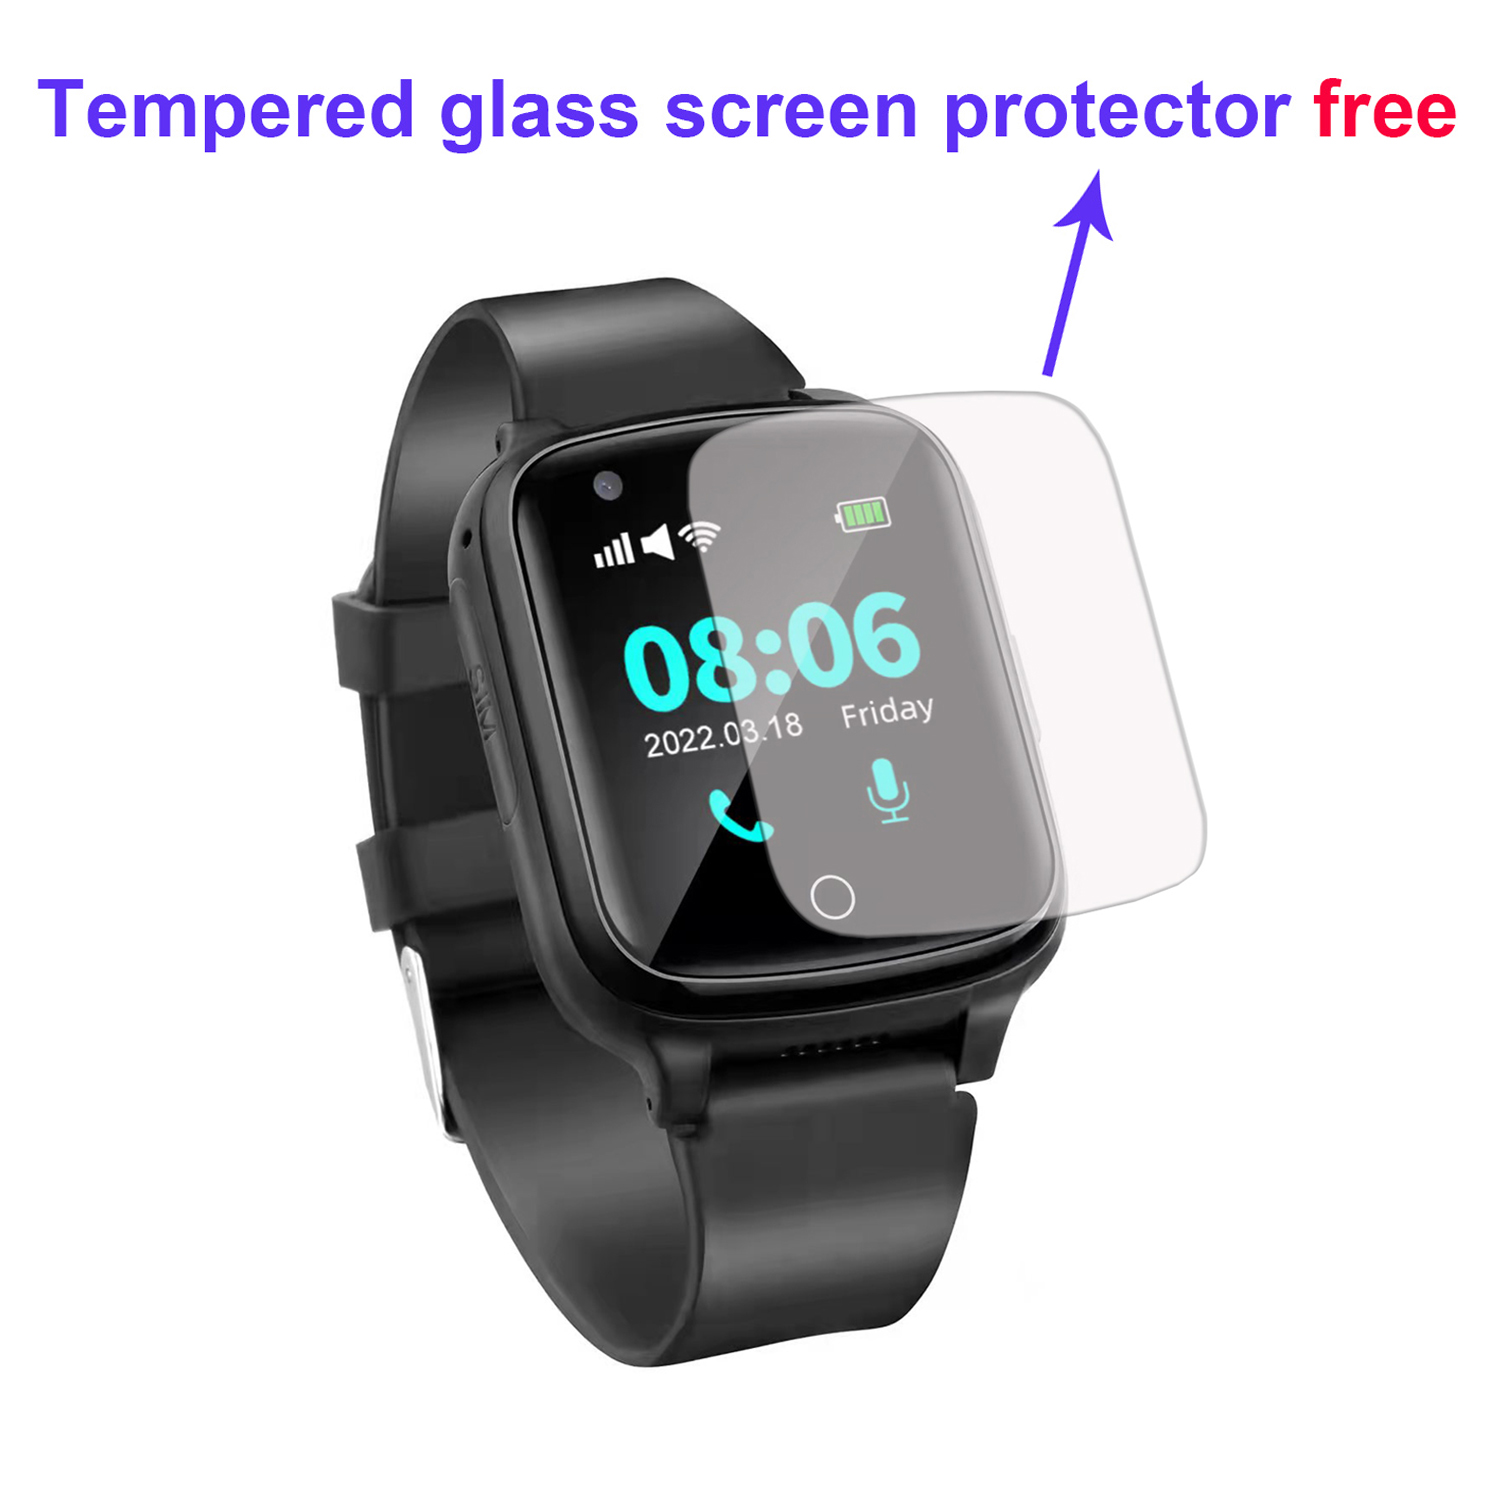 LTE Android 8.1 Fall Down Alert Elderly GPS Watch Tracker D41